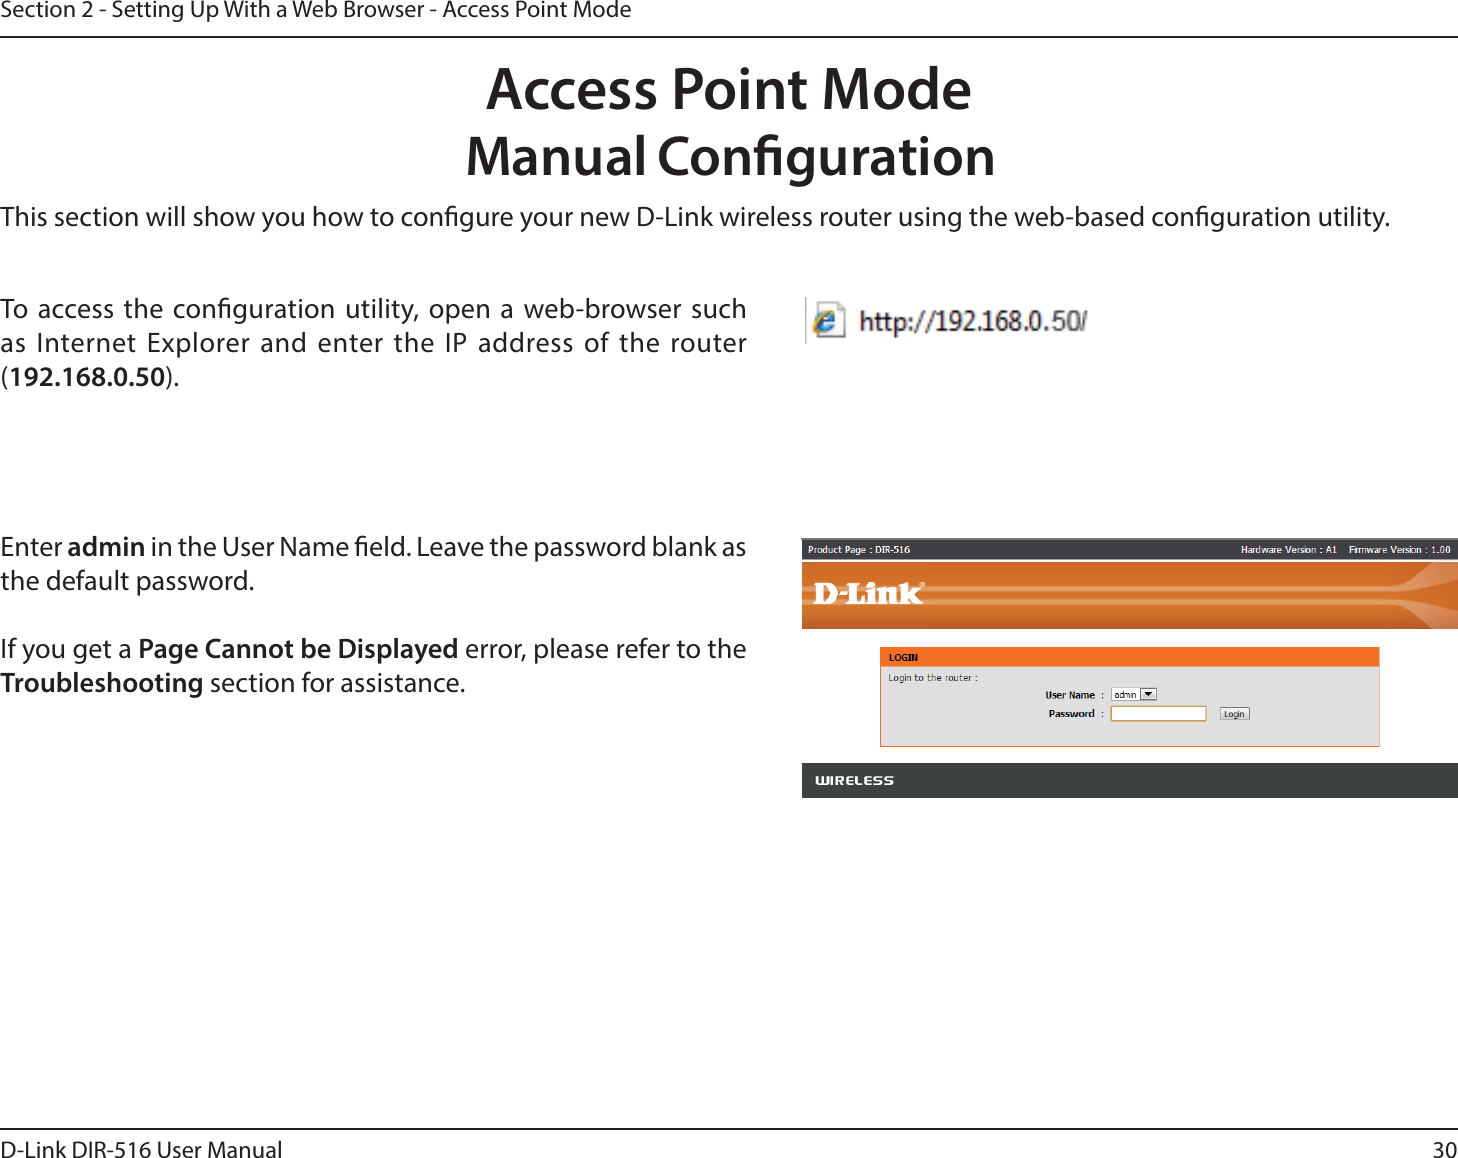 30D-Link DIR-516 User ManualSection 2 - Setting Up With a Web Browser - Access Point ModeThis section will show you how to congure your new D-Link wireless router using the web-based conguration utility.To access the conguration utility, open a web-browser such as Internet Explorer and enter the IP address of the router (192.168.0.50).Enter admin in the User Name eld. Leave the password blank as the default password. If you get a Page Cannot be Displayed error, please refer to the Troubleshooting section for assistance.Manual CongurationAccess Point Mode